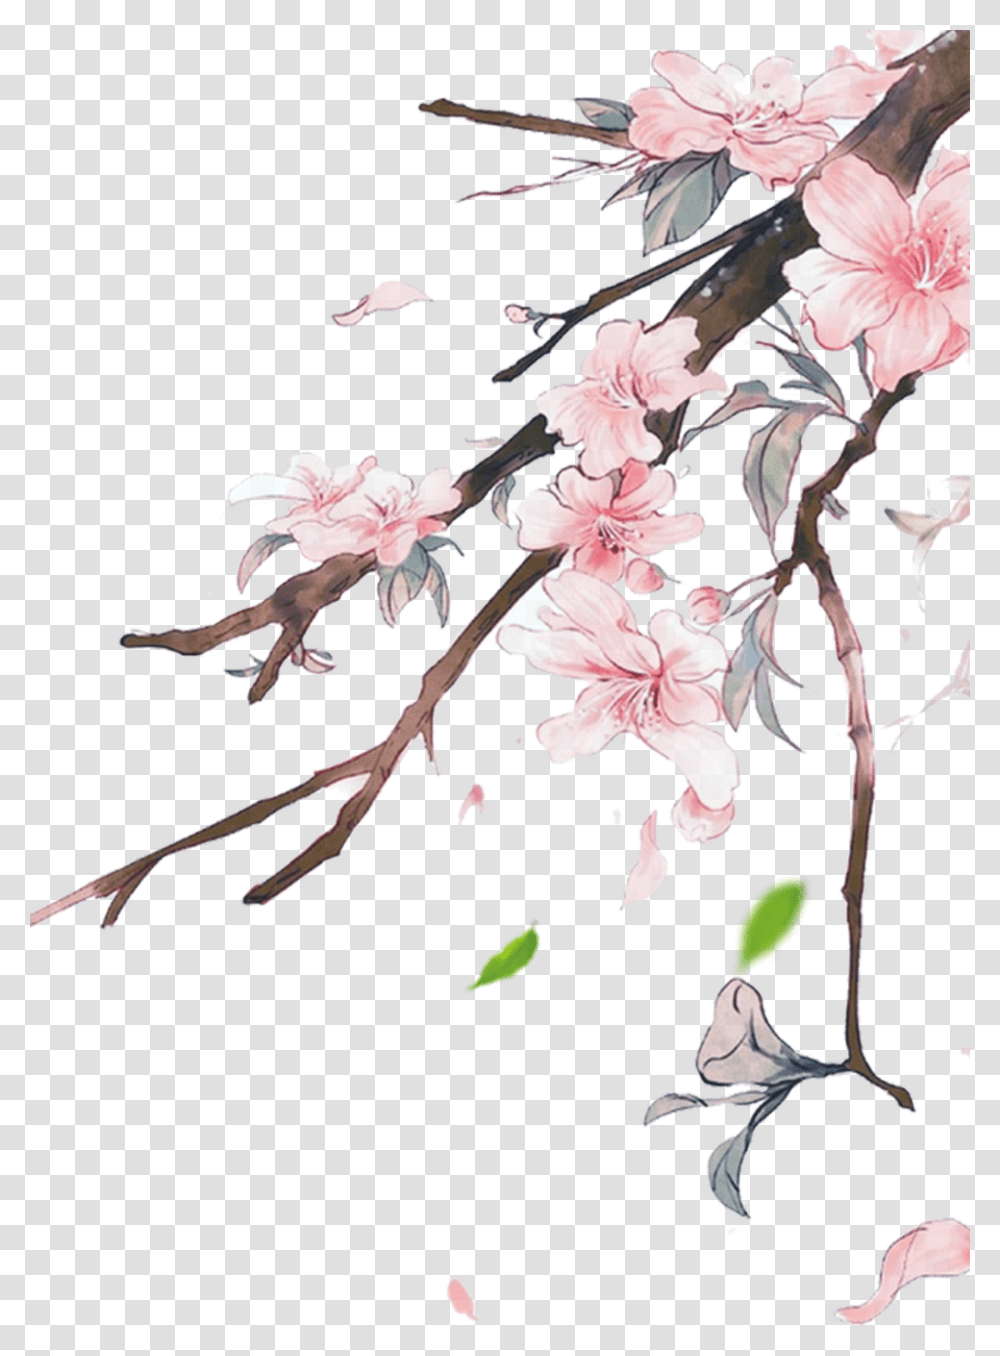 Flowers Pink Pinkflowers Japanese Nature Ftestickers Background Chinese Flowers, Plant, Blossom, Cherry Blossom, Petal Transparent Png